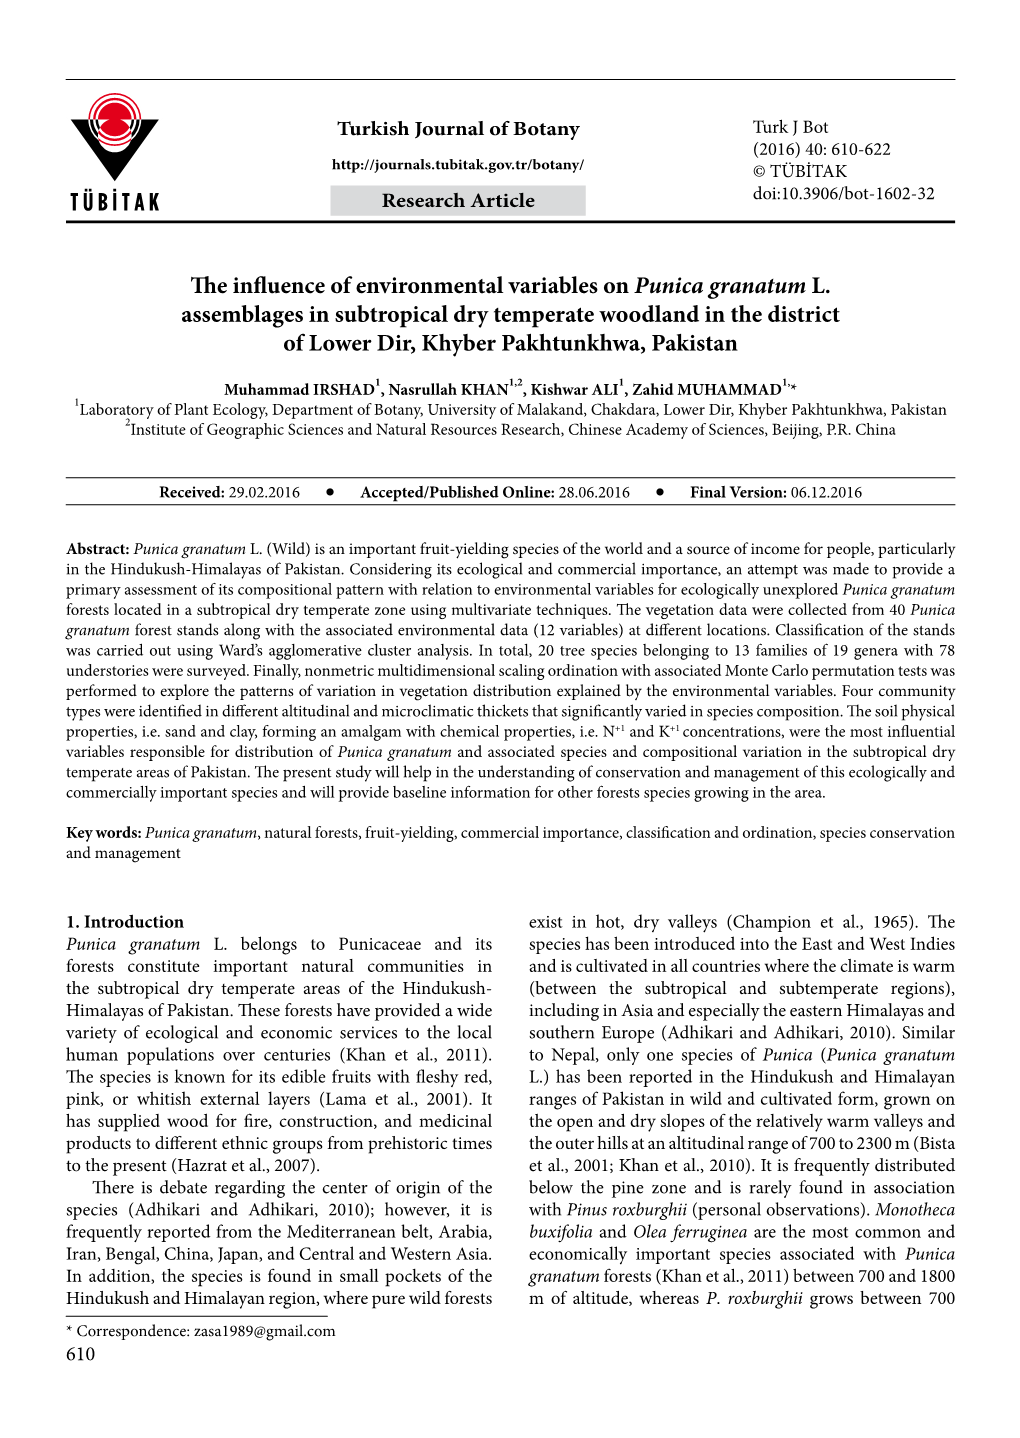 The Influence of Environmental Variables on Punica Granatum L